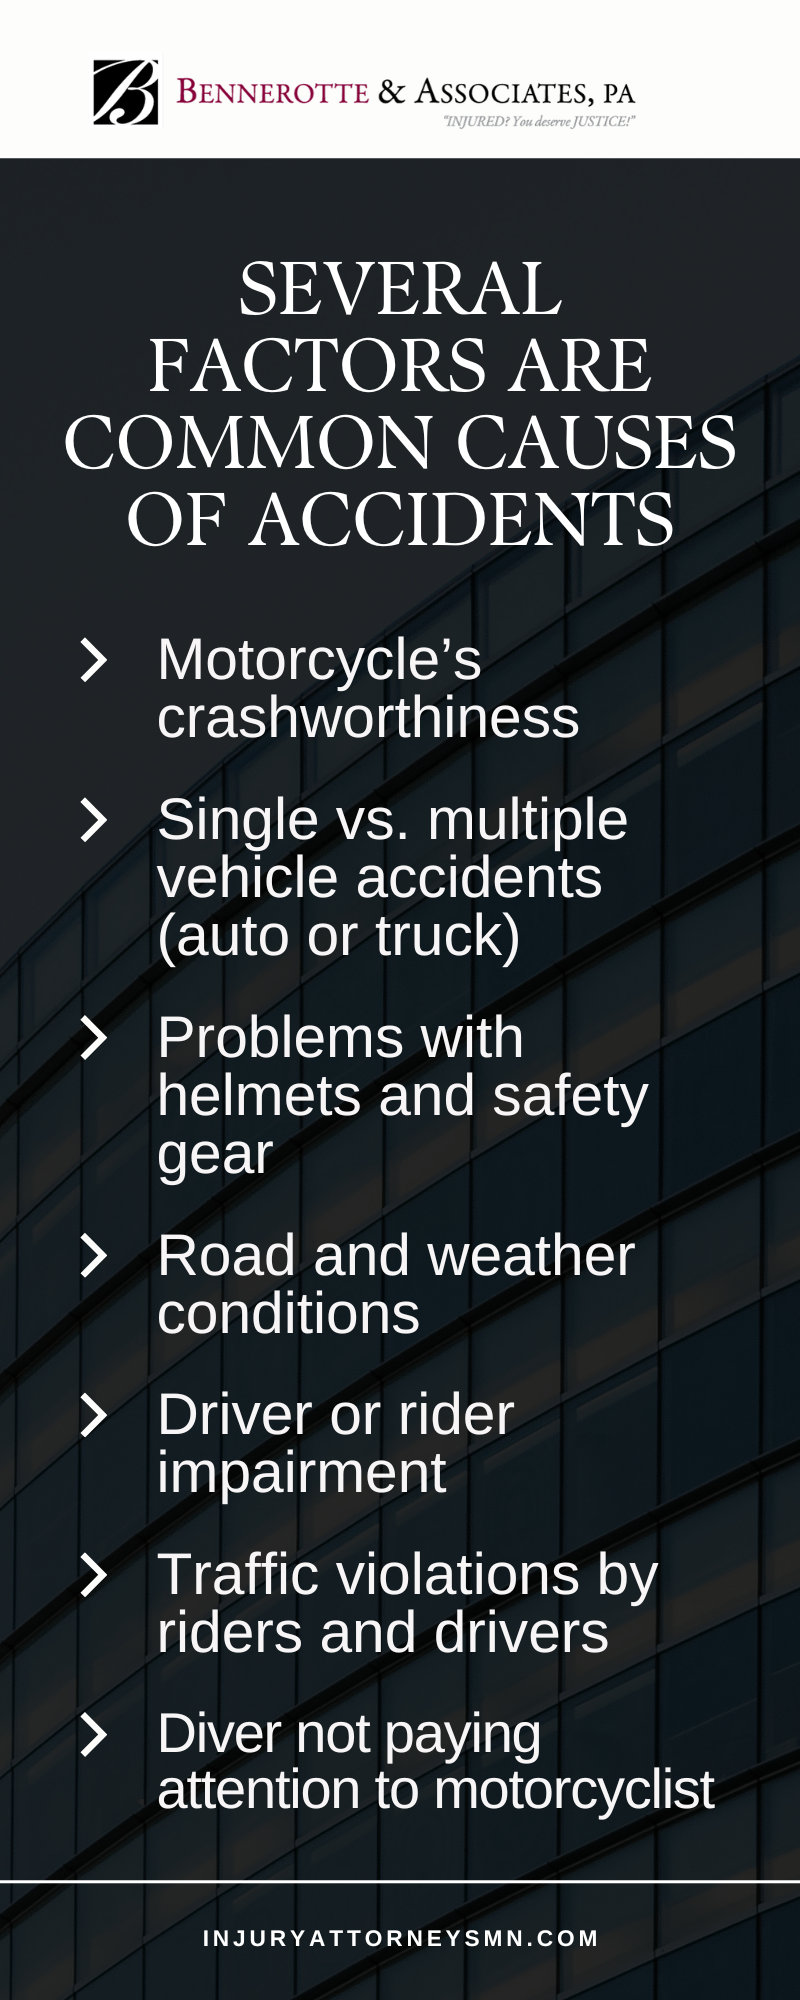 Several Factors Are Common Causes Of Accidents Infographic